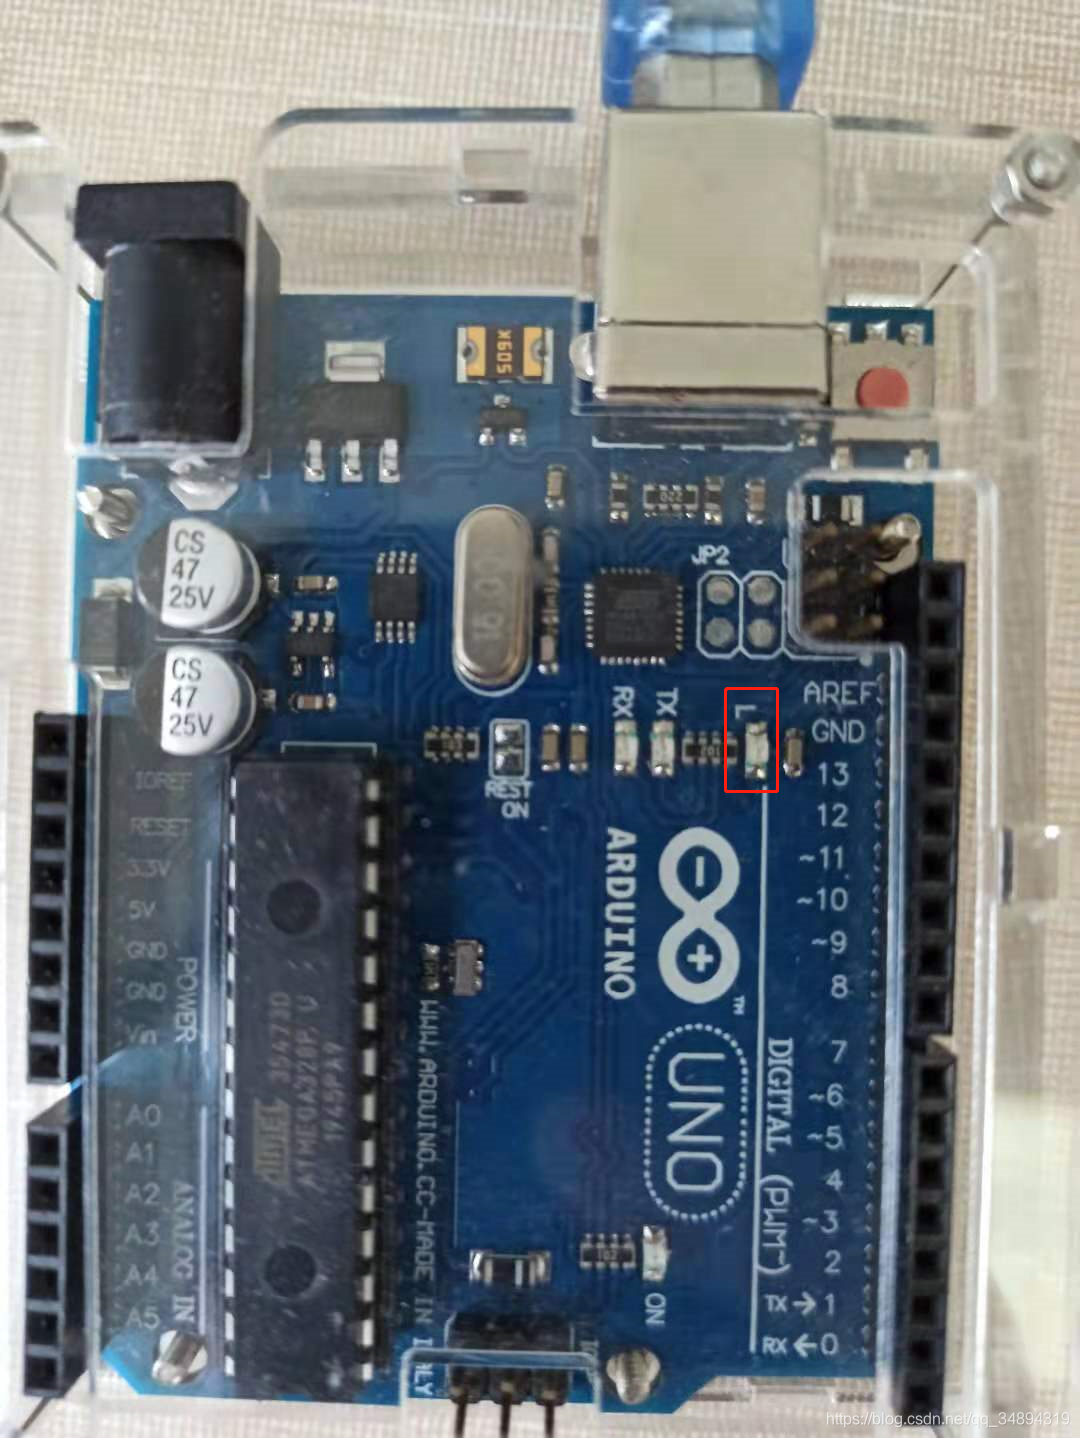 MatlabװSimulink Support Package for Arduino HardwareMatlab Support Package for Arduino Hardware˵